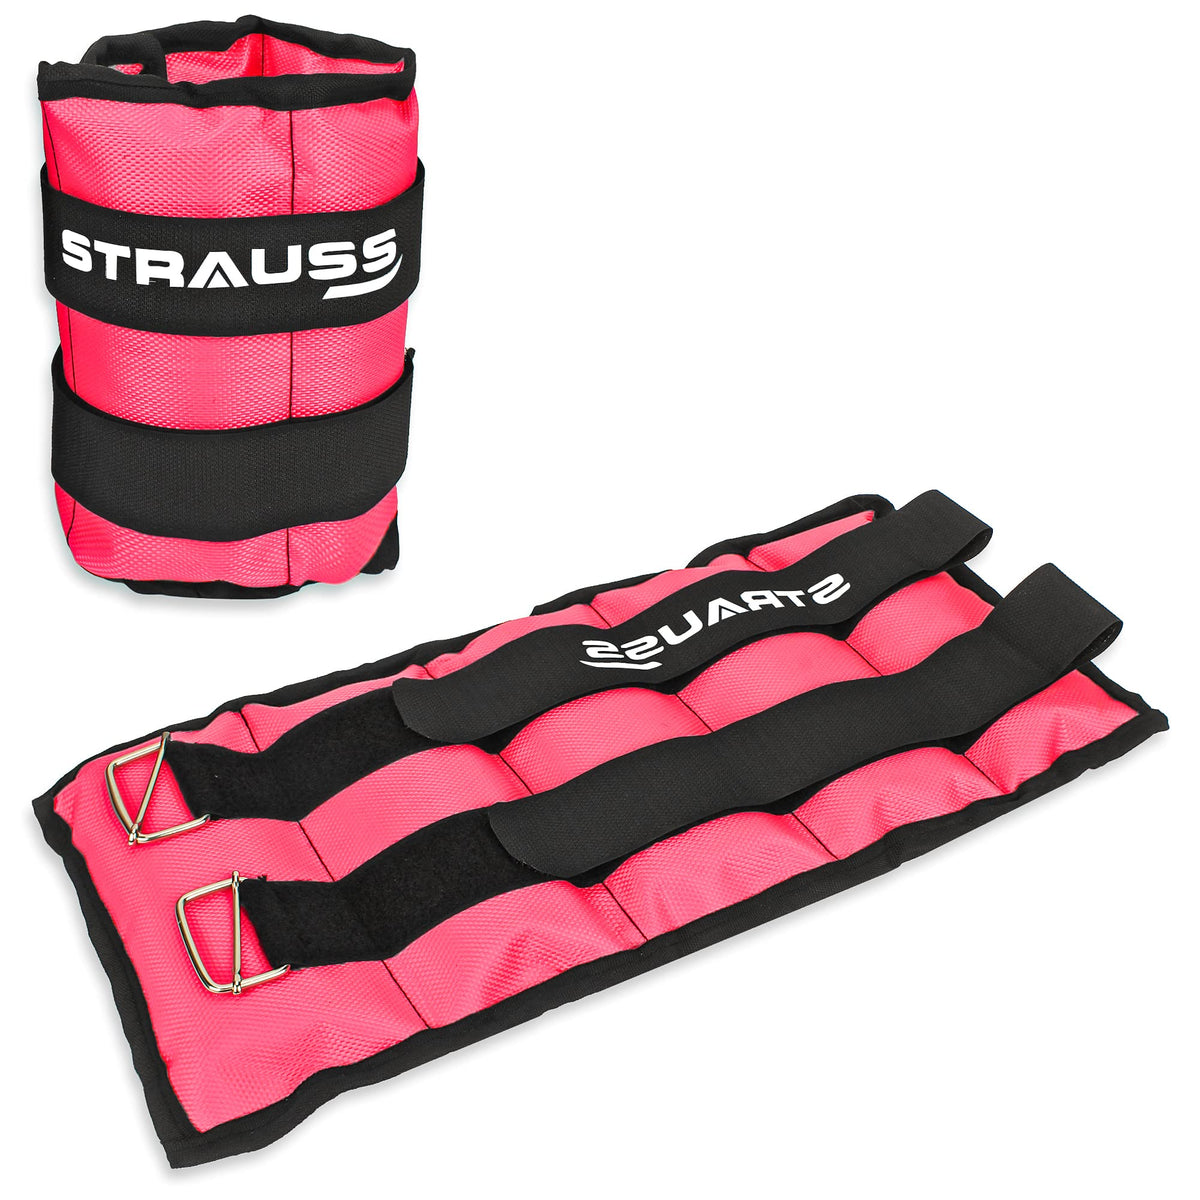 Strauss Adjustable Ankle/Wrist Weights 2 KG X 2 | Ideal for Walking, Running, Jogging, Cycling, Gym, Workout & Strength Training | Easy to Use on Ankle, Wrist, Leg, (Pink)